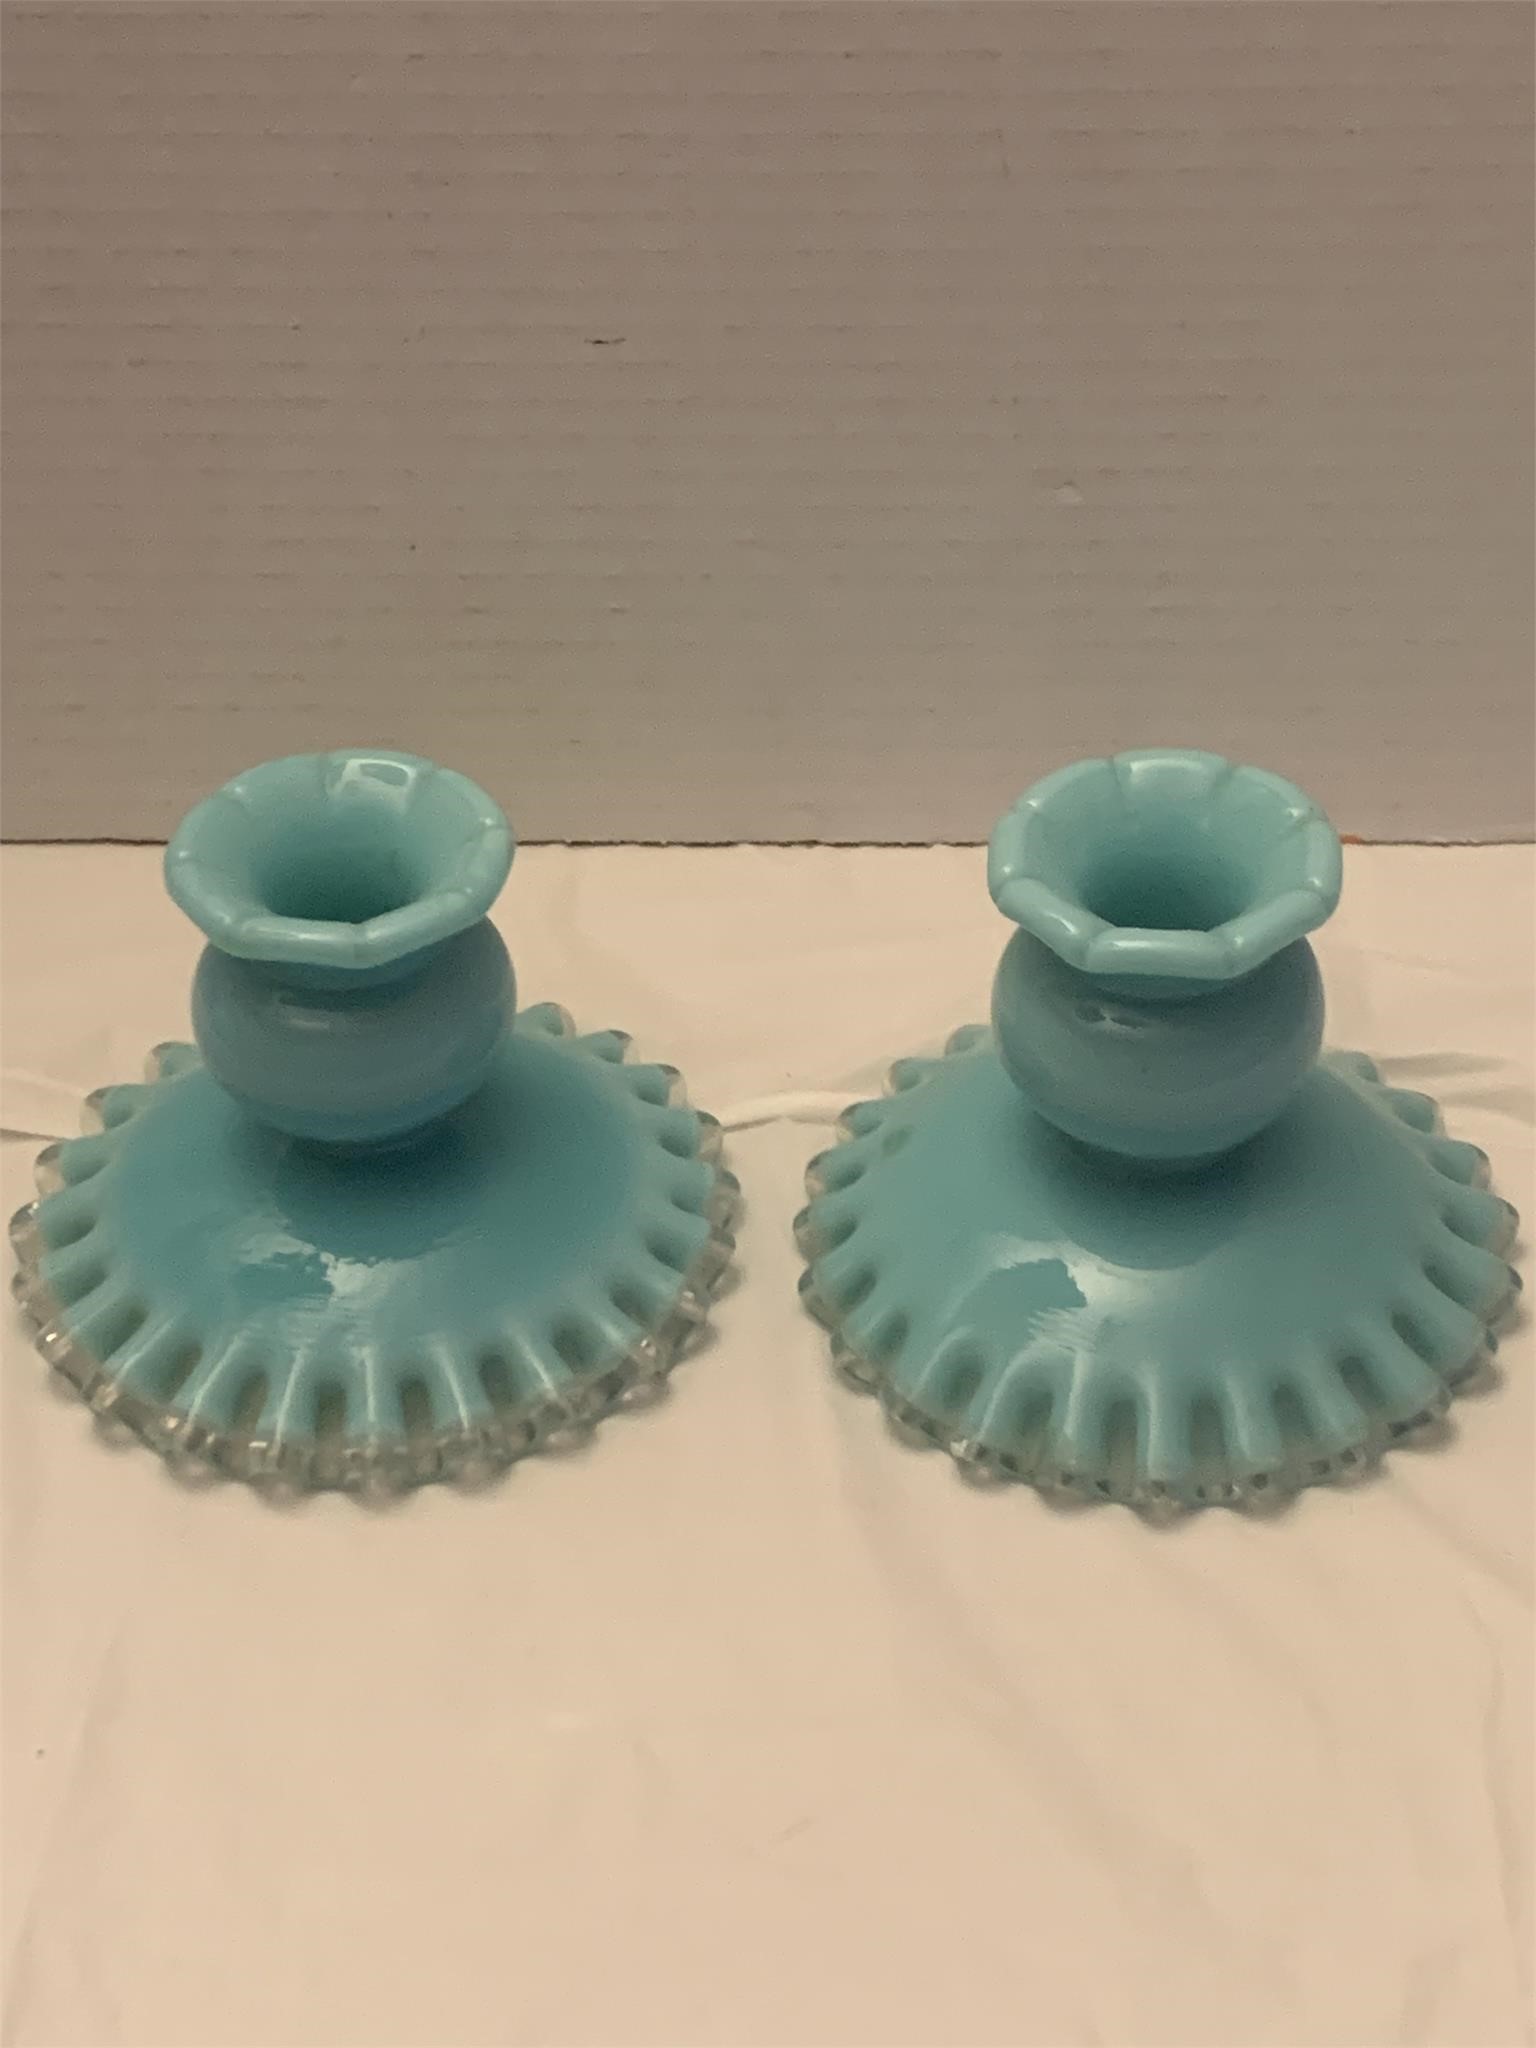 Pair of Fenton Silver Turquoise Candle Holders